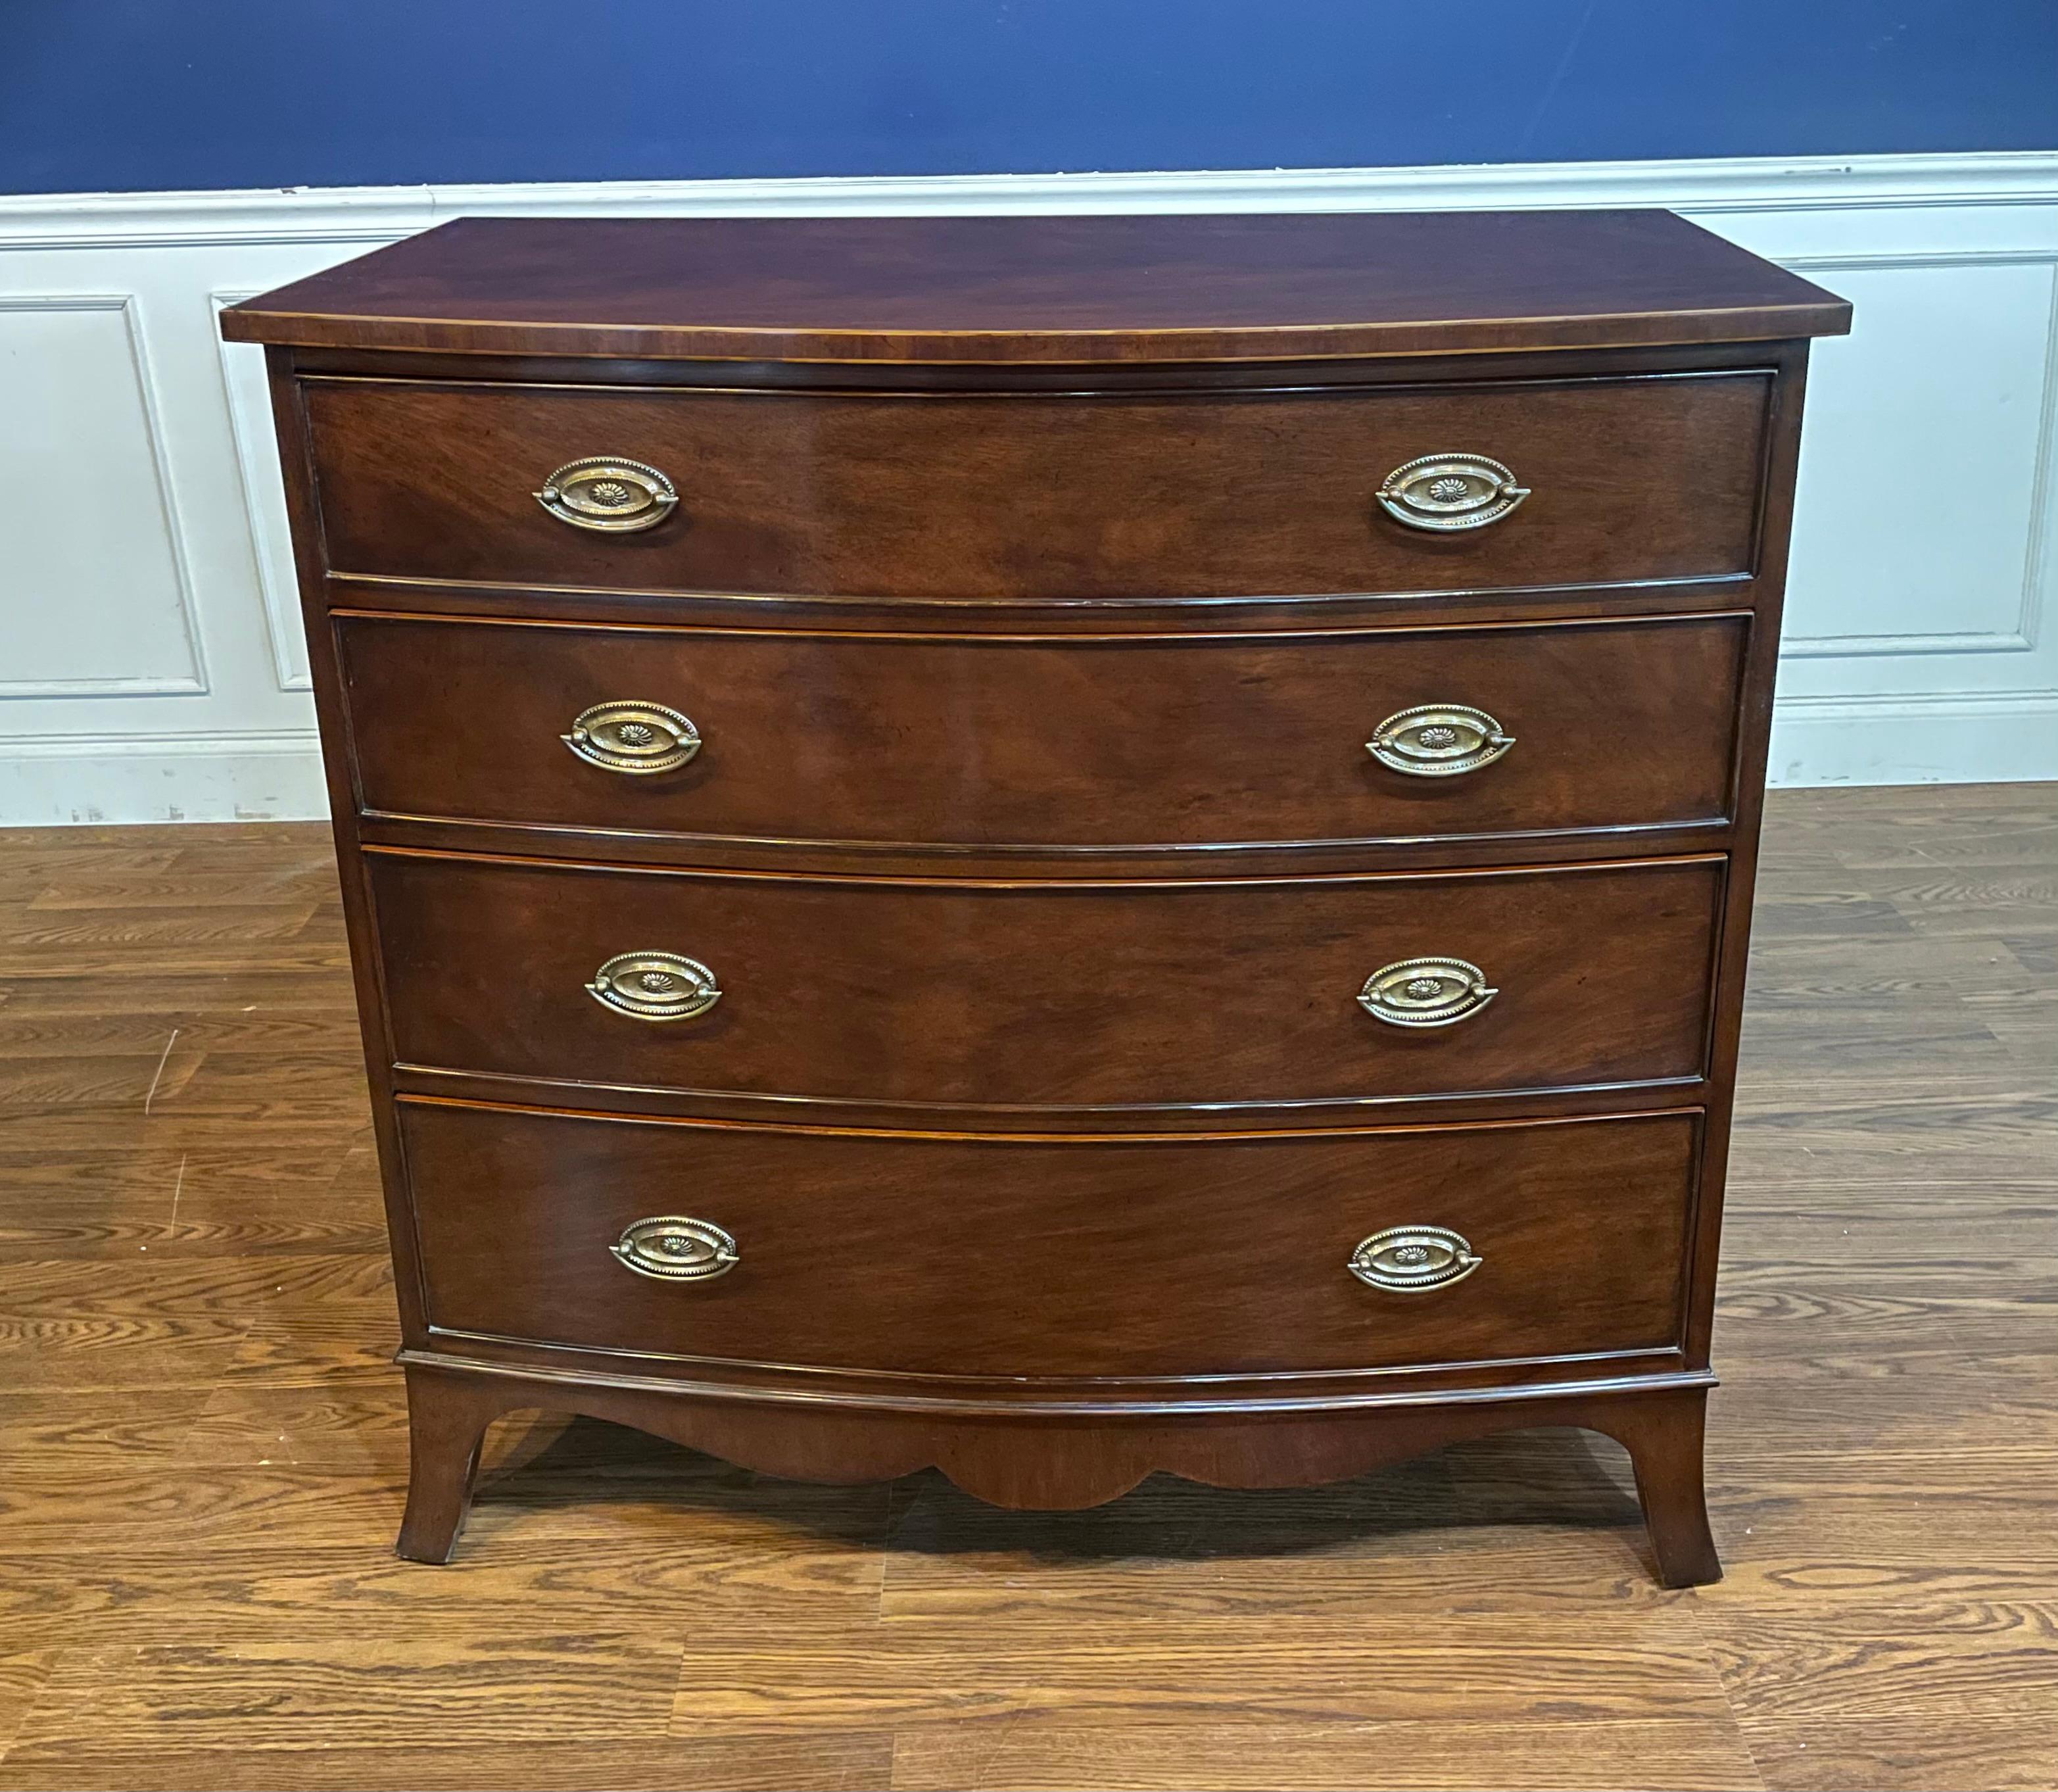 This is a classic Mahogany inlaid bow front chest by Leighton Hall. Its design was inspired by chests from the early 1800s. It features four drawers, solid brass hardware and faux key holes. The drawers are dovetailed and oak lined.  It has a hand